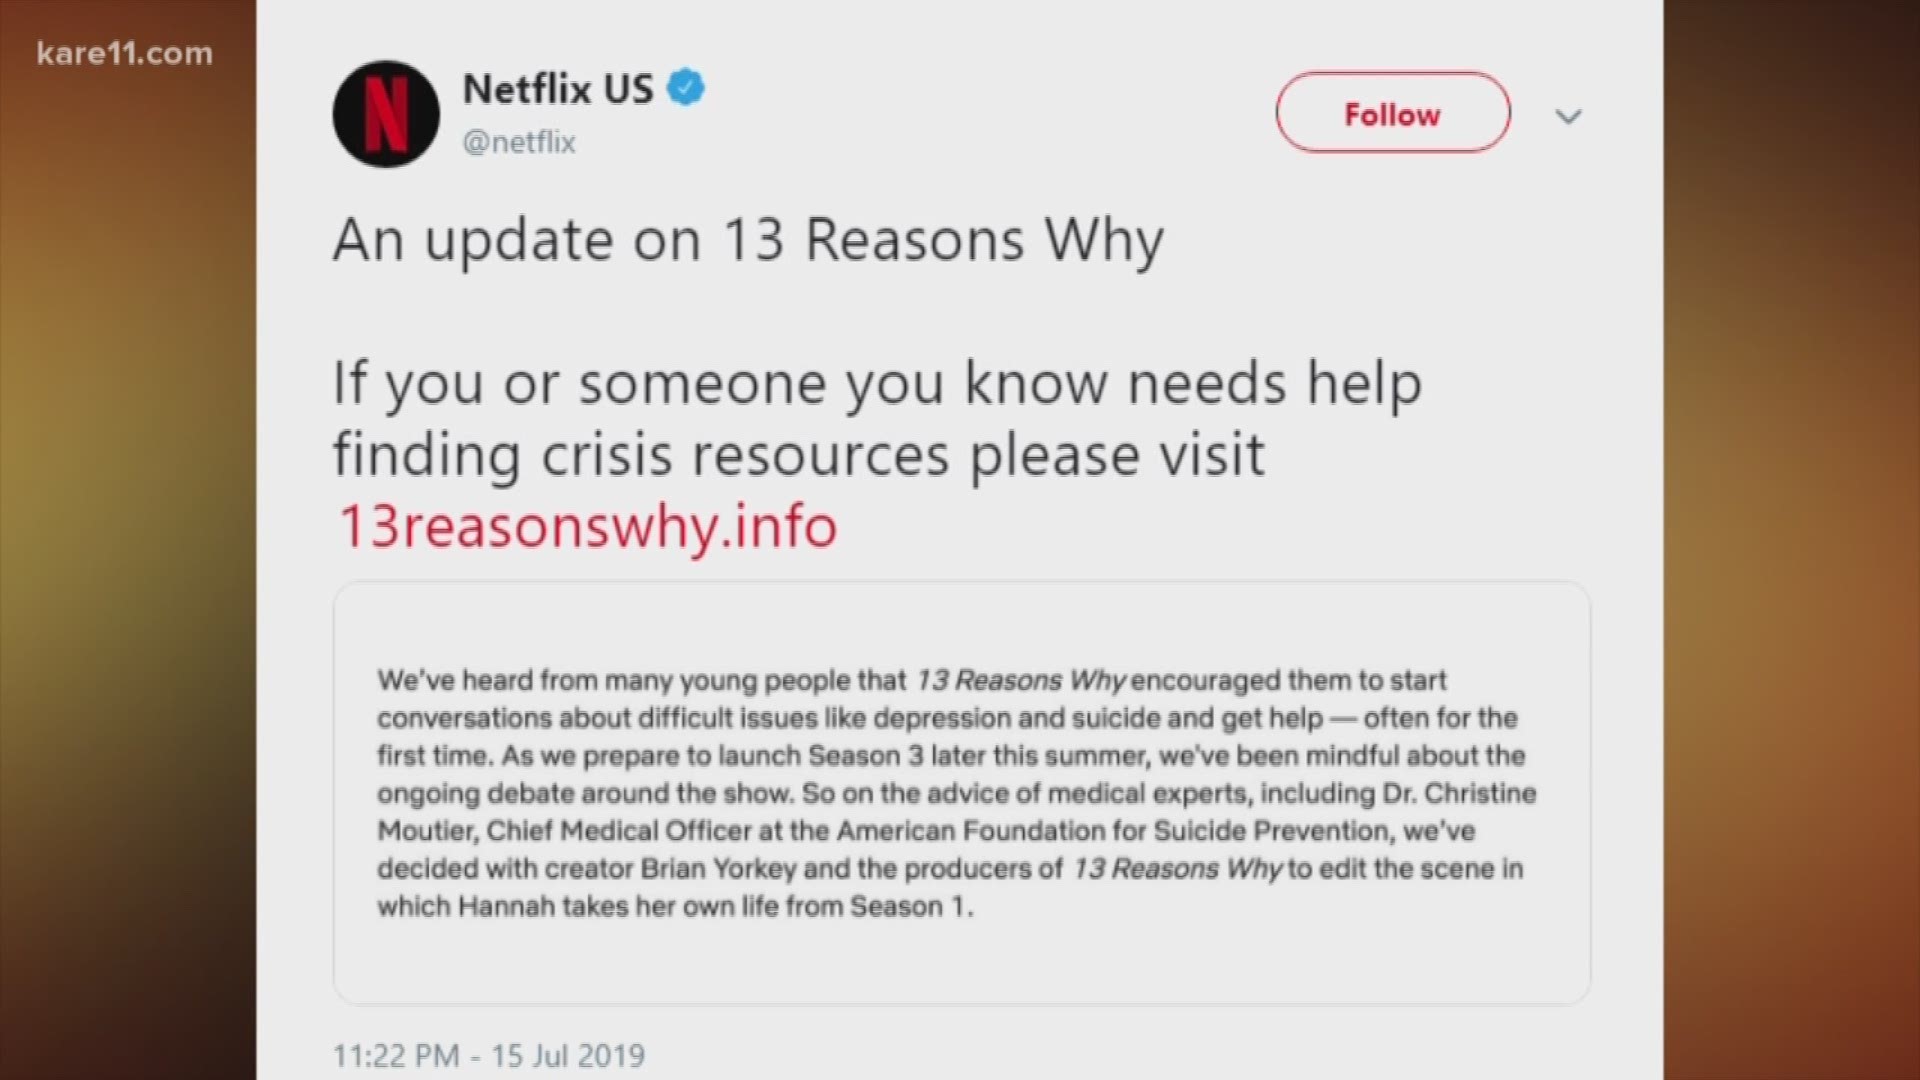 Netflix announced that more than two years after '13 Reasons Why' debuted, they're editing a controversial scene where the main character takes her own life.